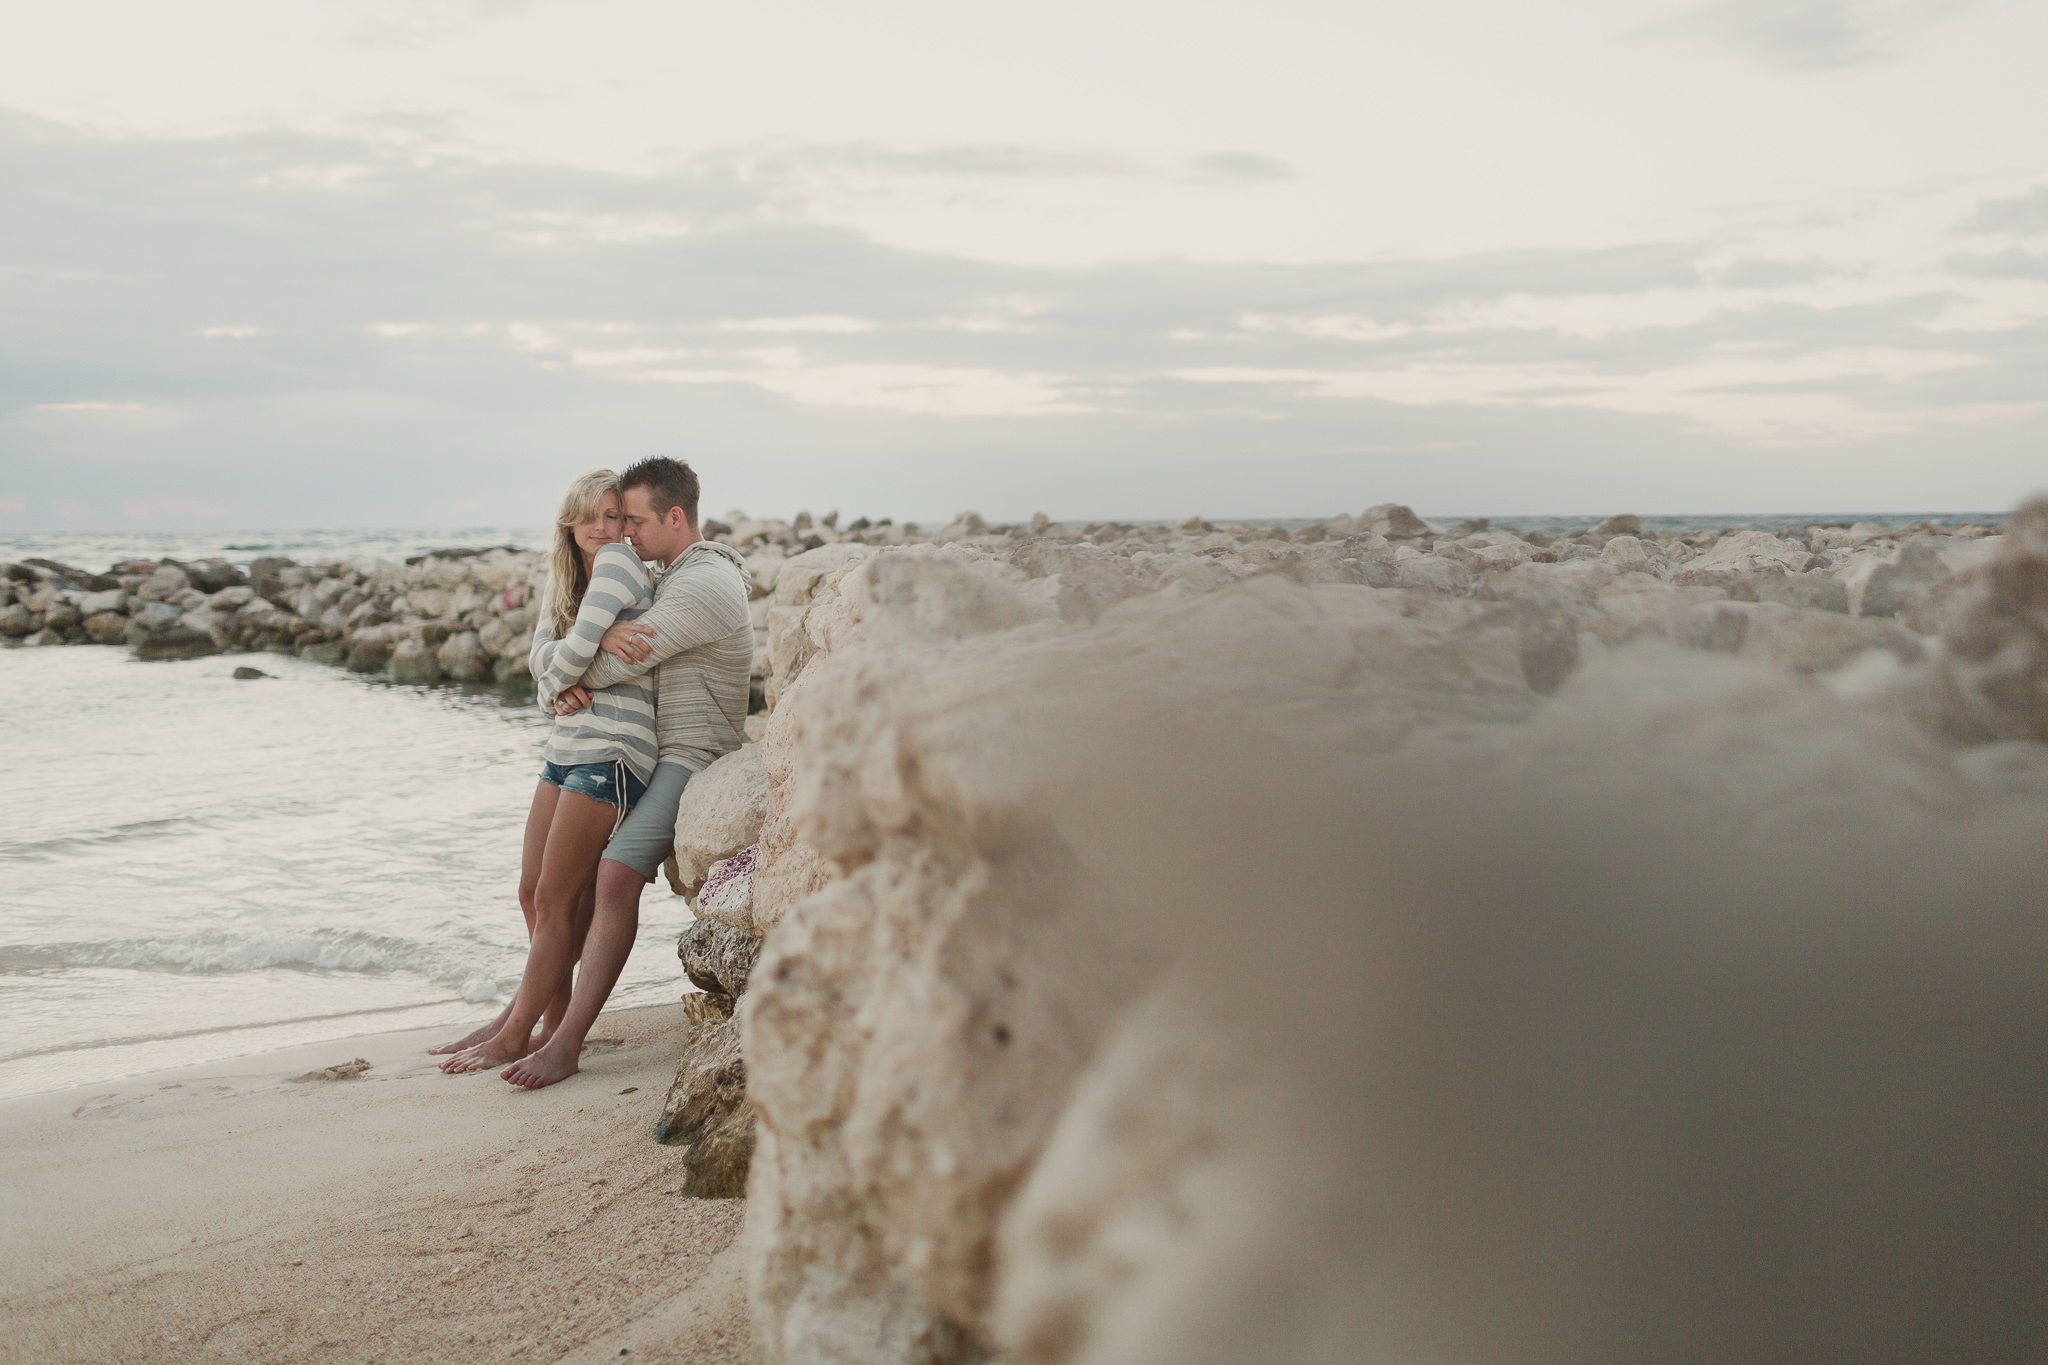 couple in an embrace leaning against a rock wall by water